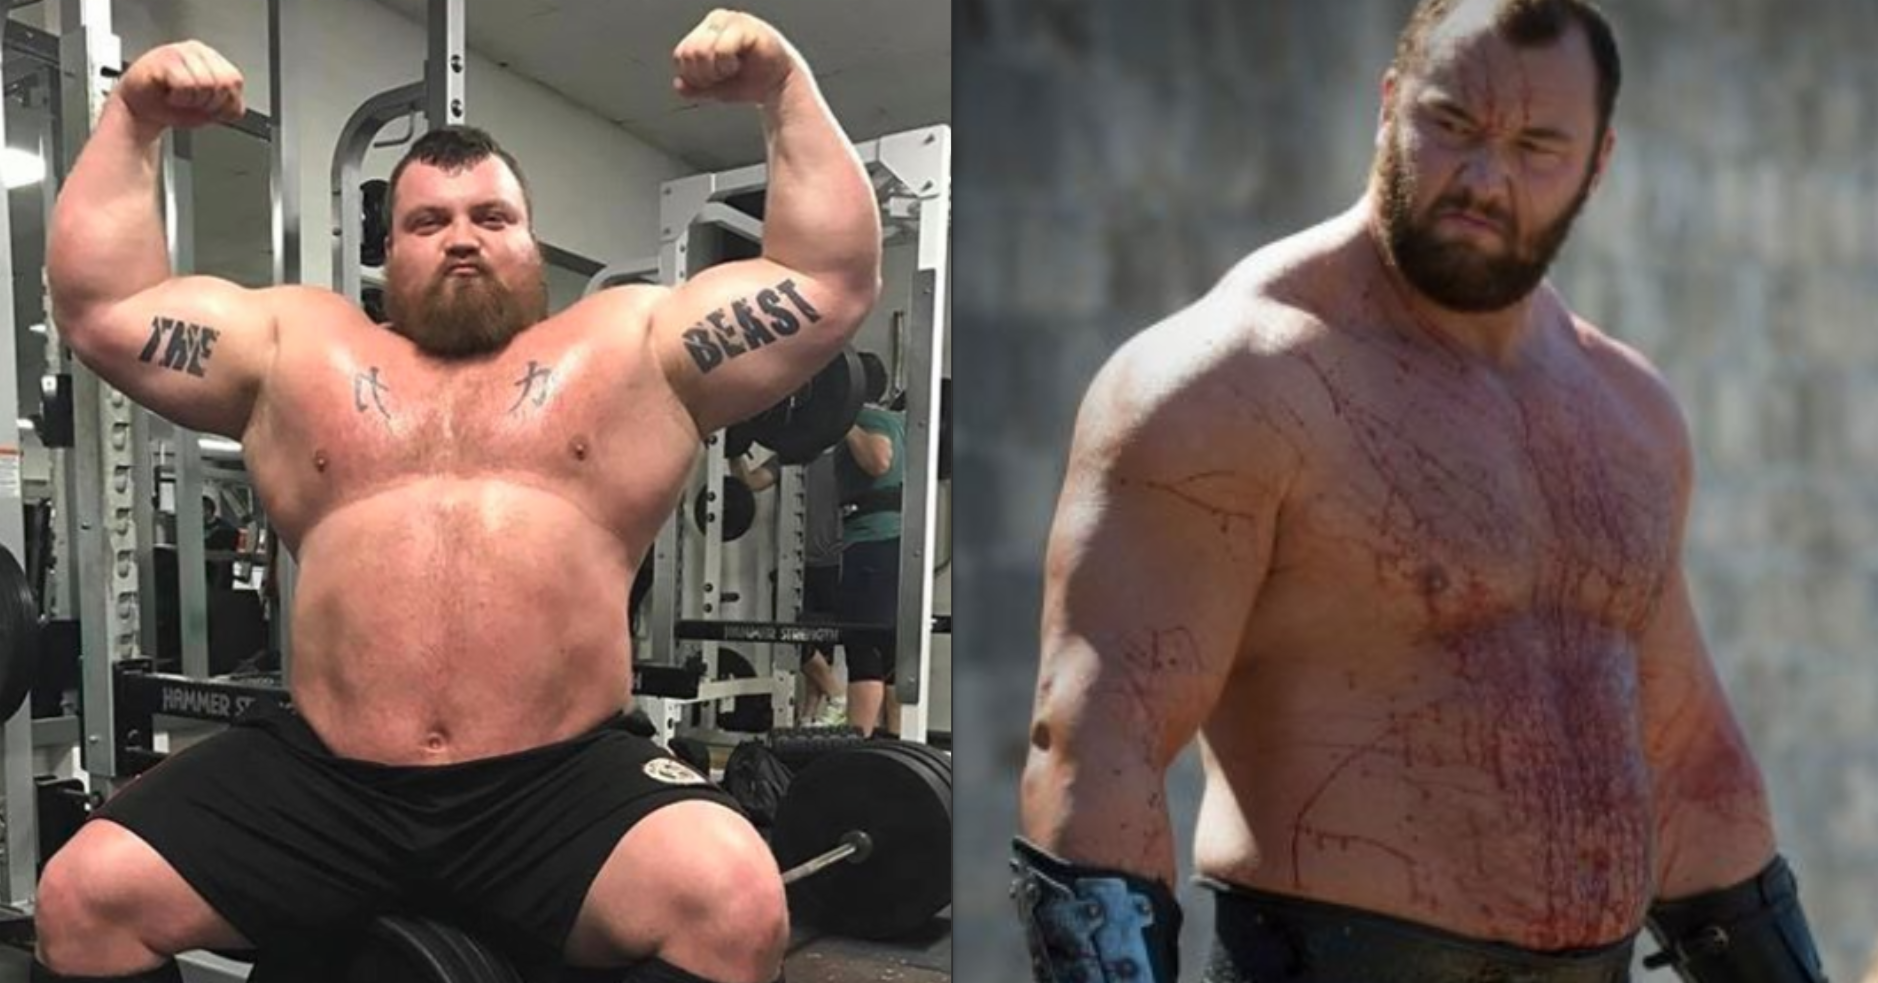 British Powerlifter Eddie Hall Beat The Mountain From 'Game of Thrones